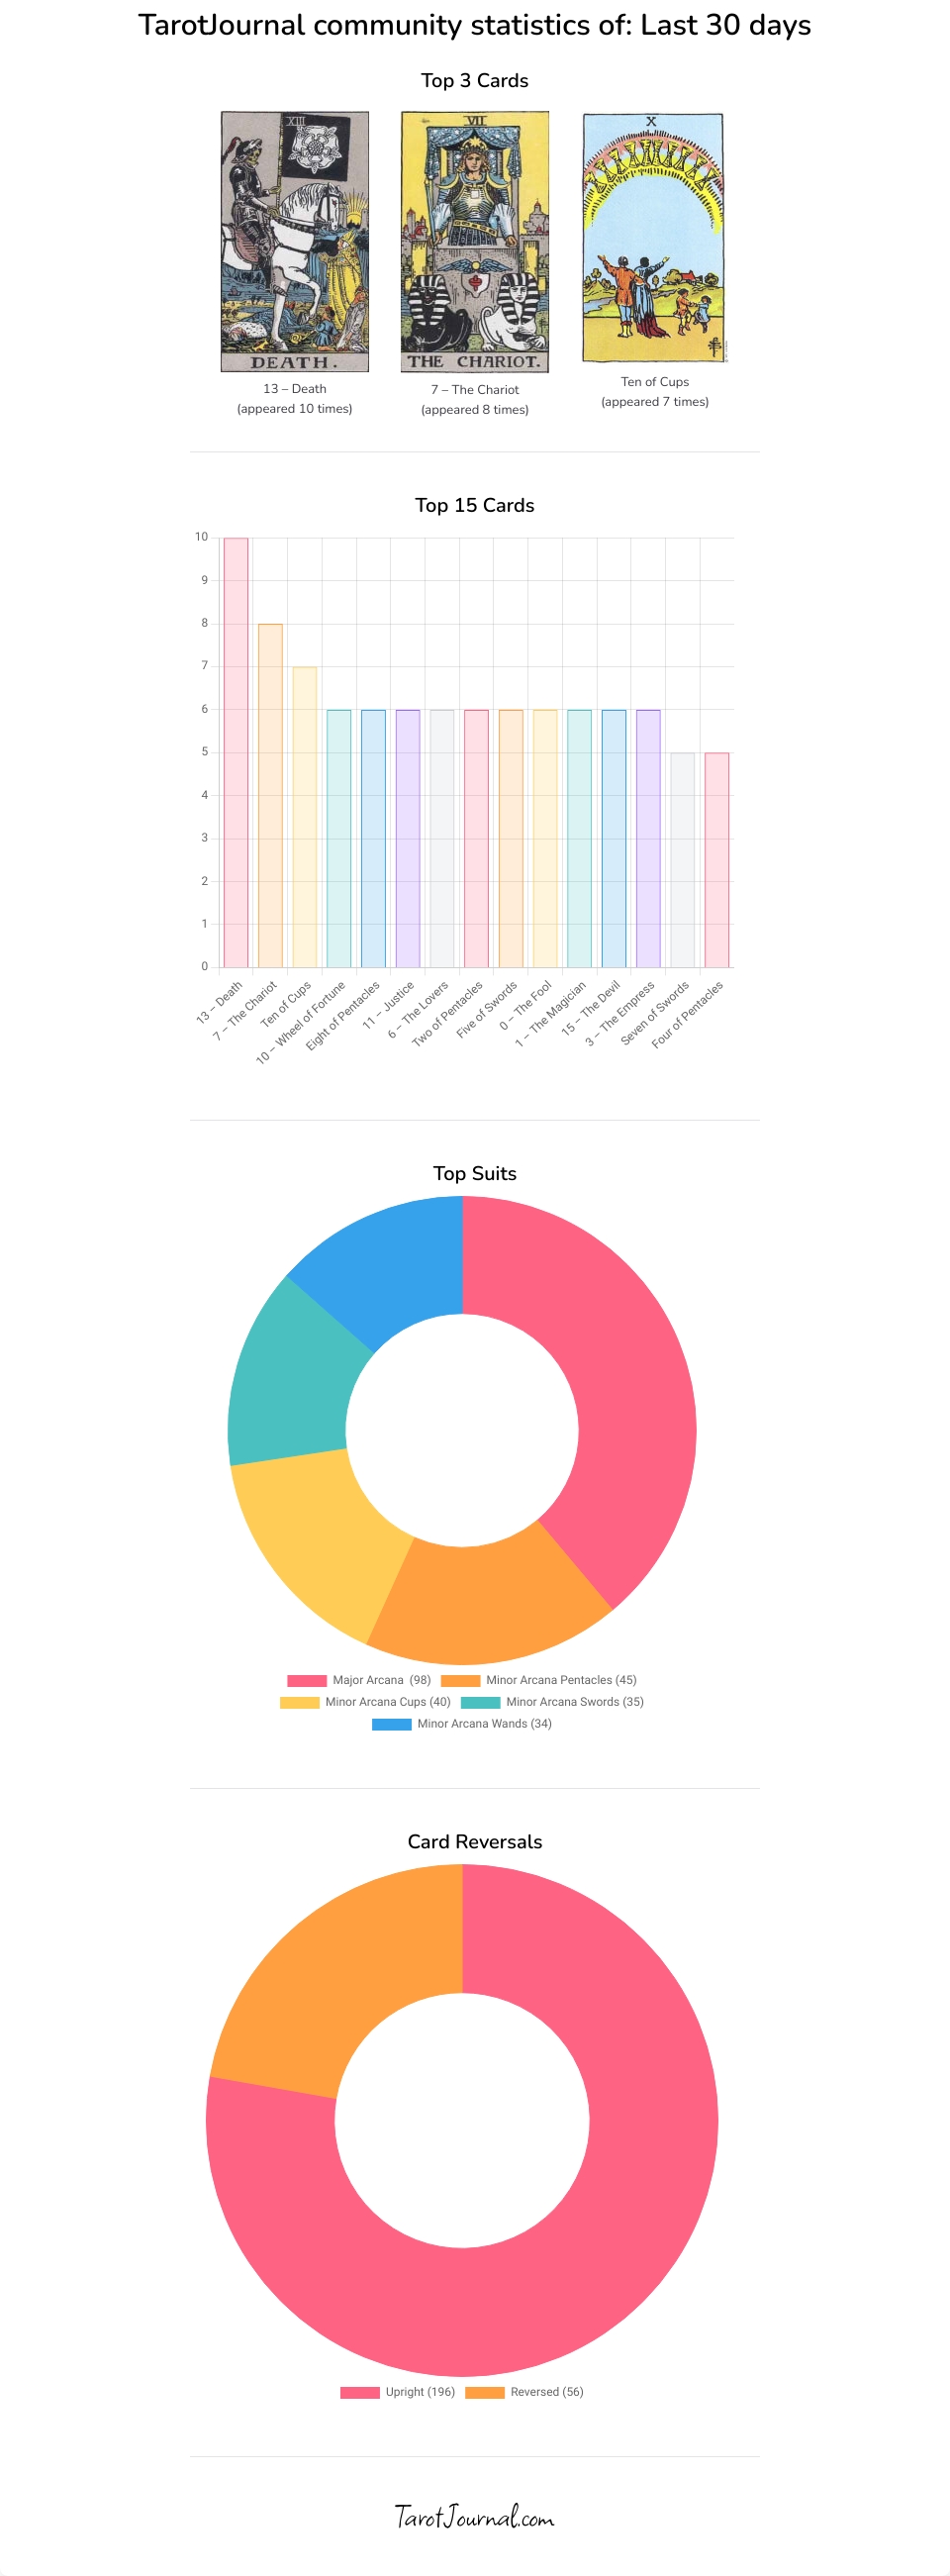 Most drawn cards by the TJ community in July - tarot statistics by m-c